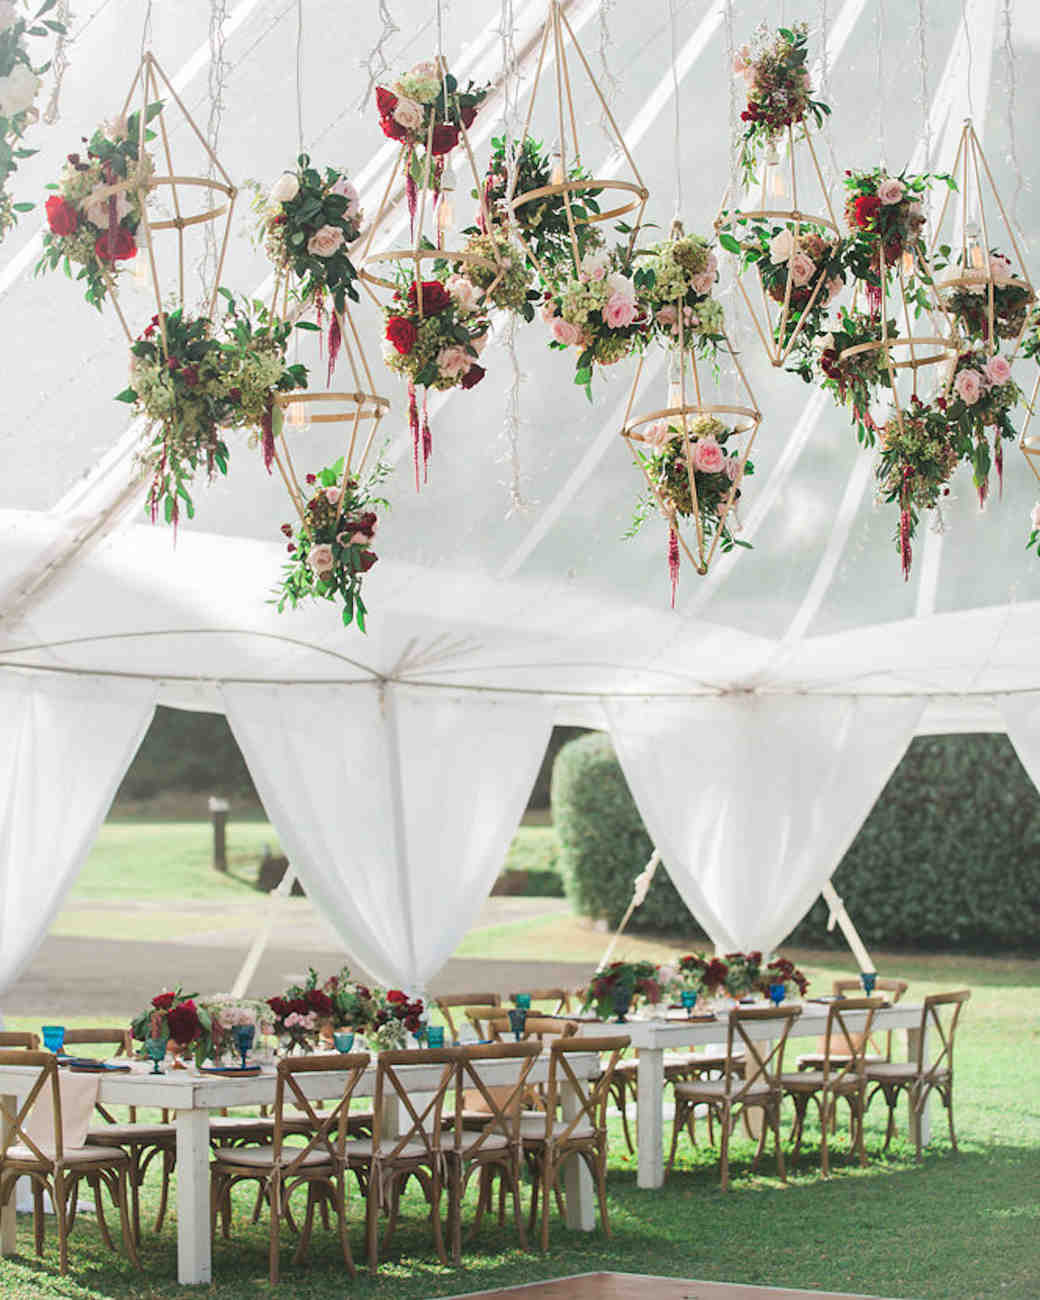 Outdoor Engagement Party Decoration Ideas
 How to Throw the Perfect Backyard Engagement Party